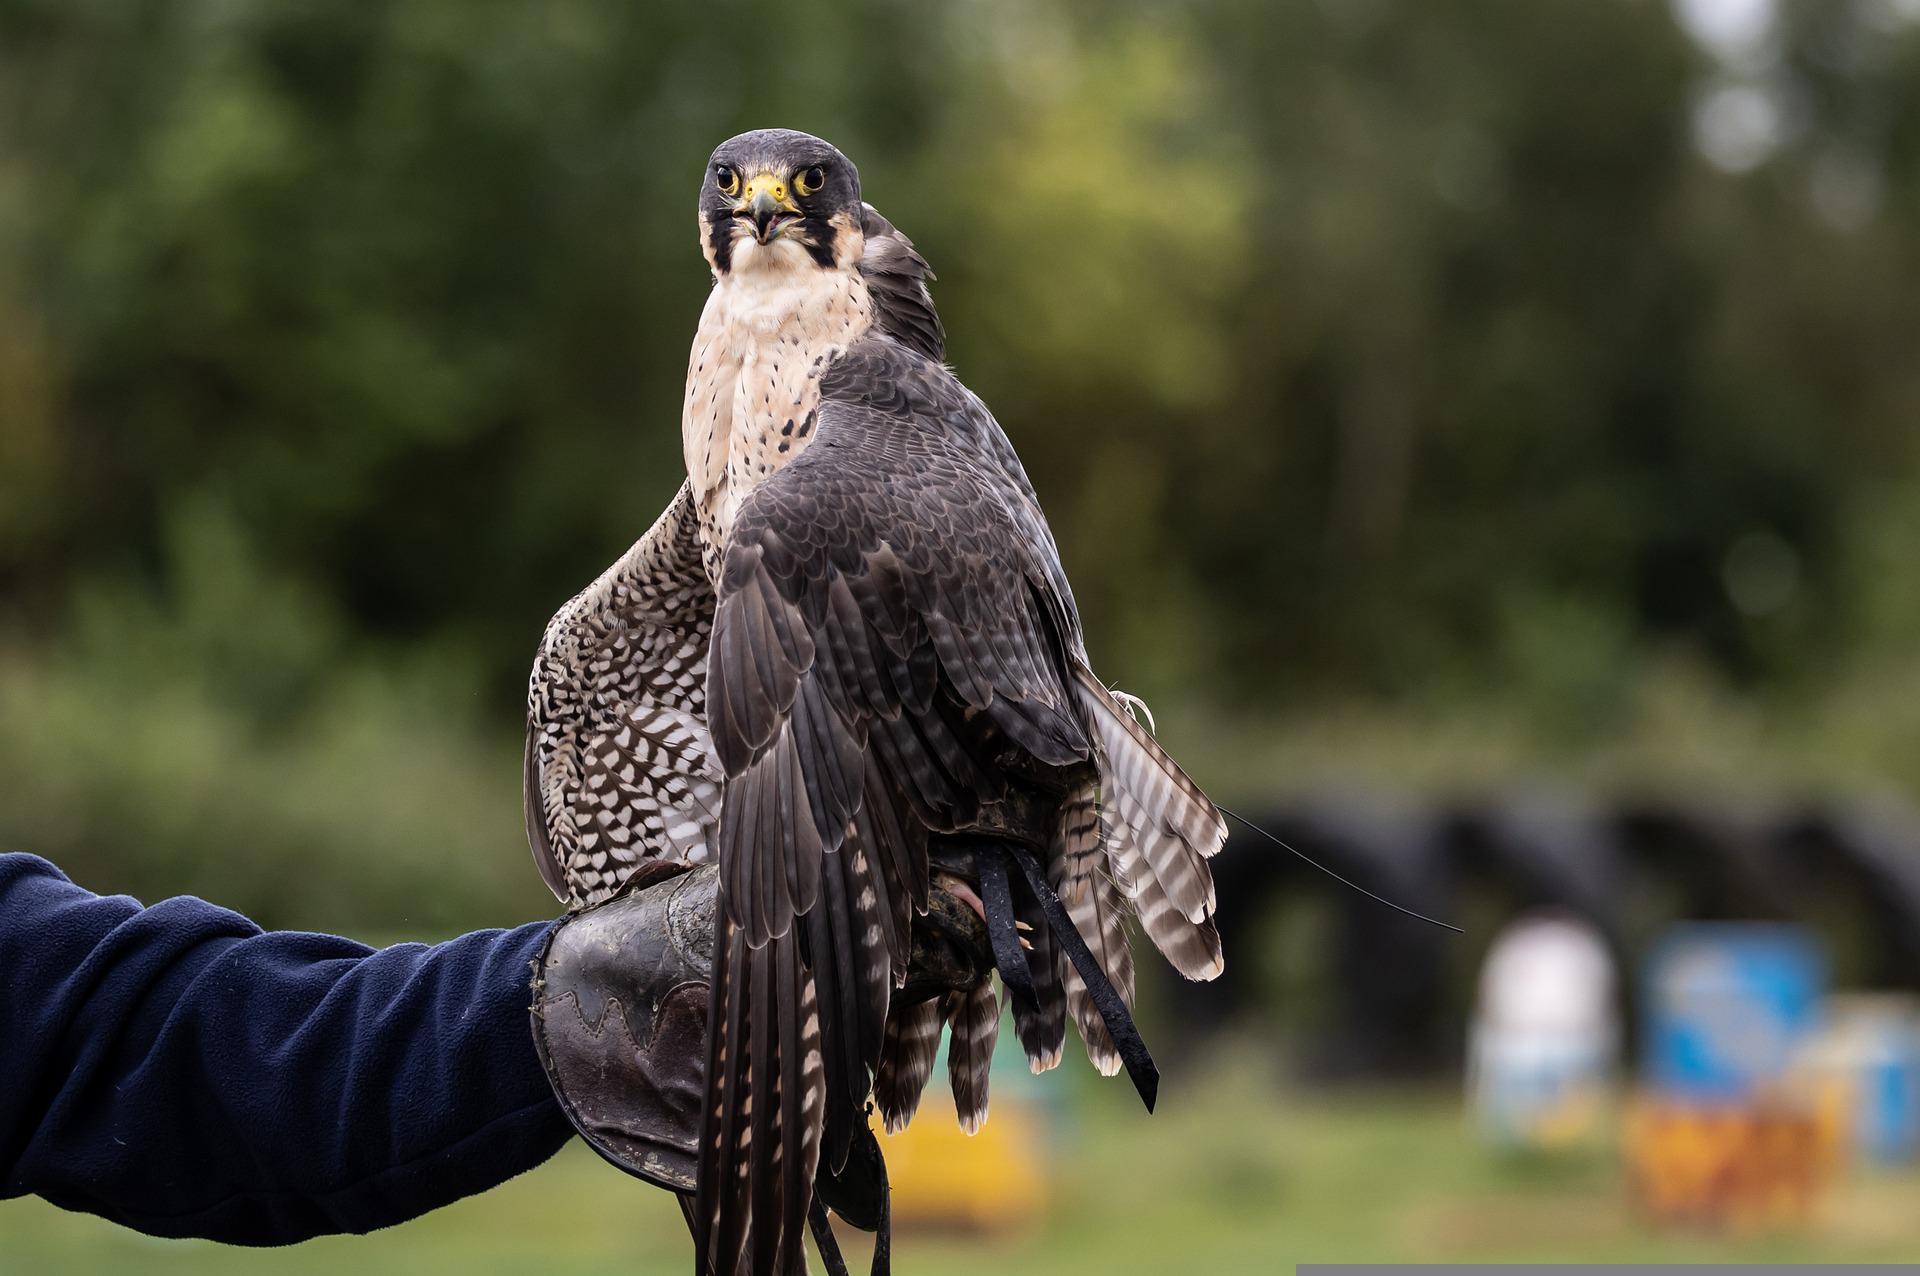 What Do Peregrine Falcons Need to Survive? - Falconry Advice